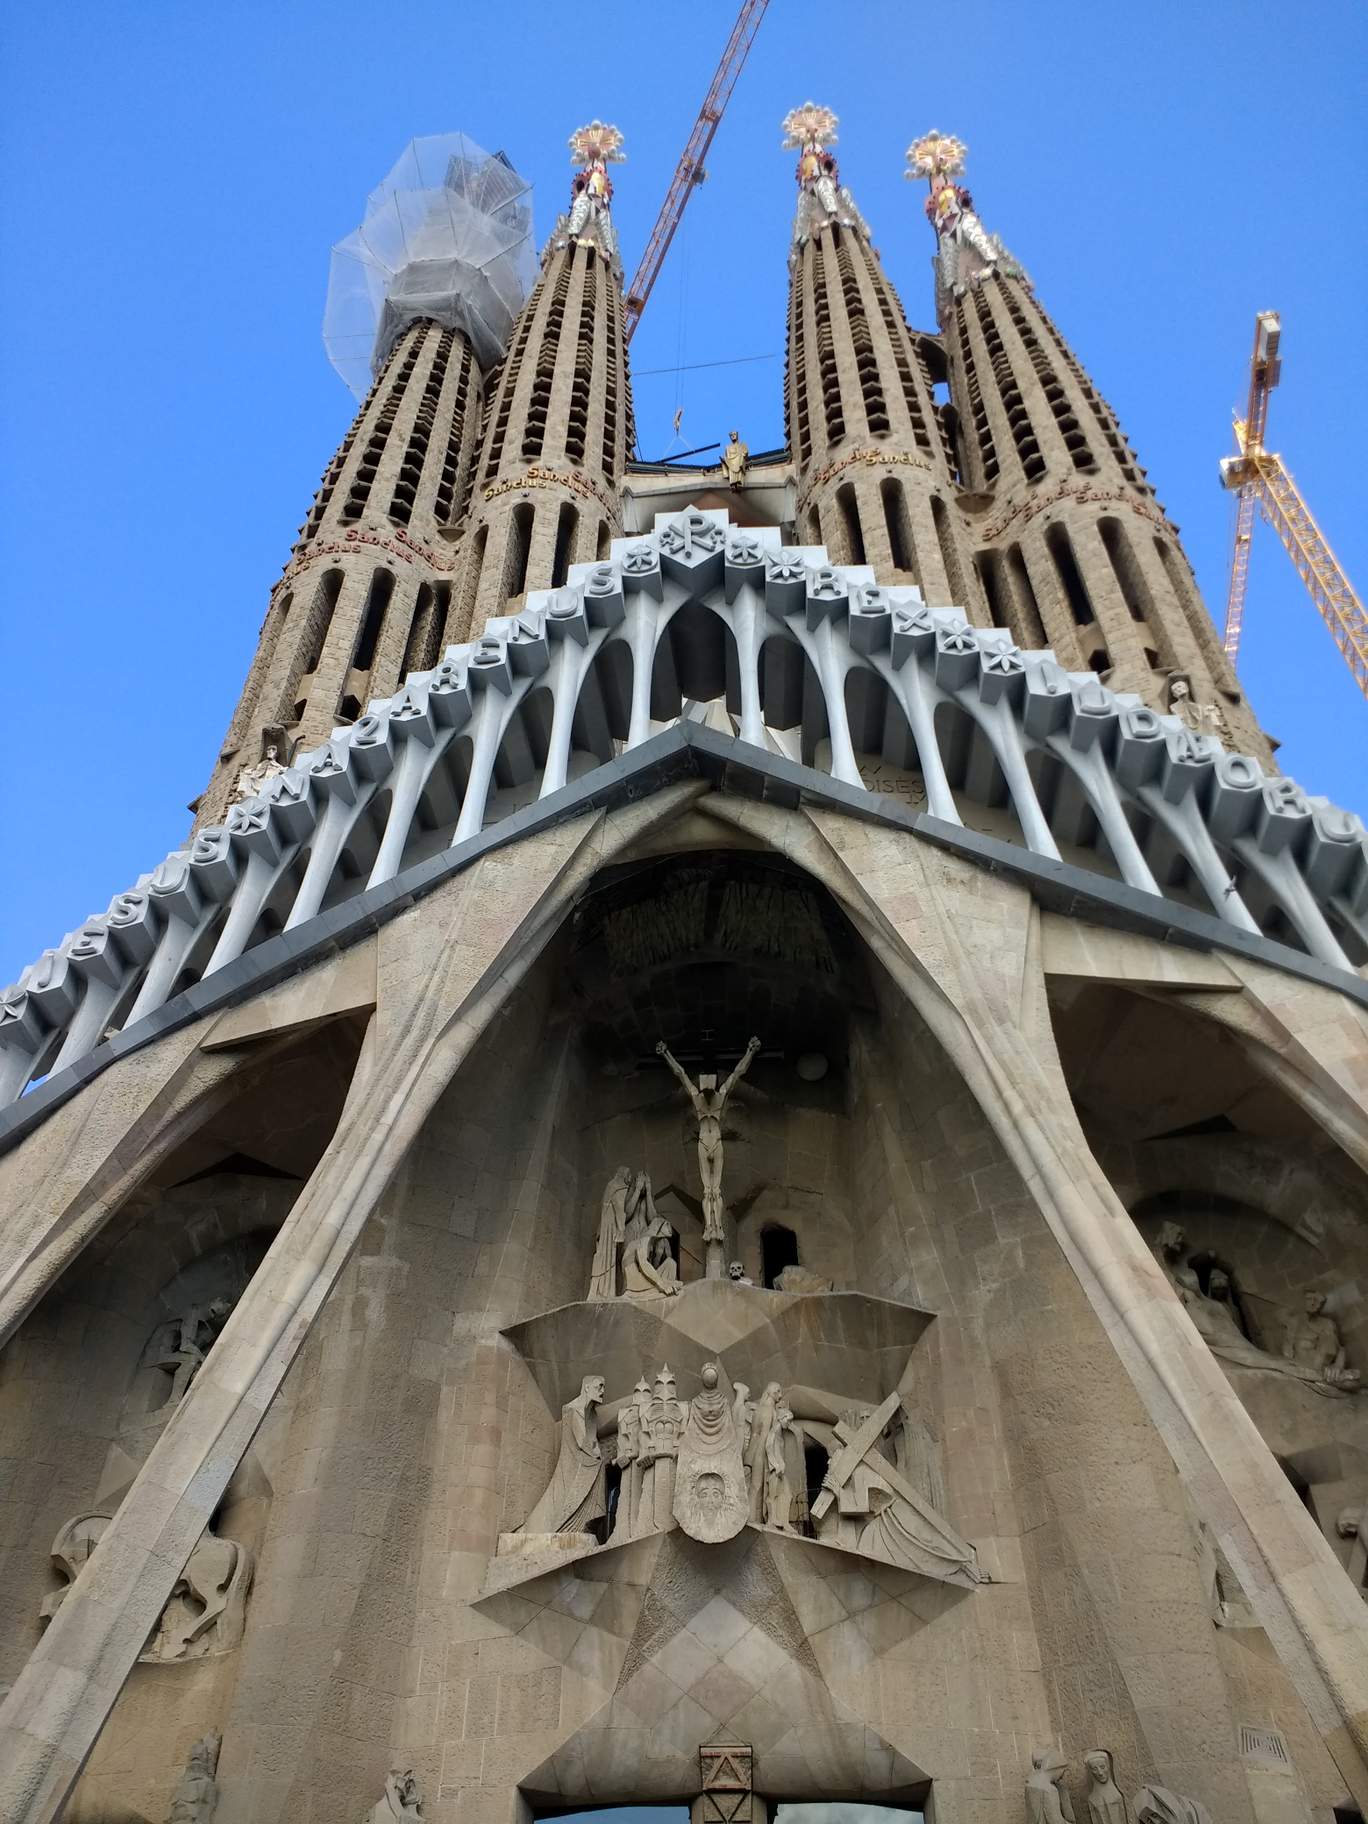 Detail of the sculptures on the southern side of La Sagrada Familia.